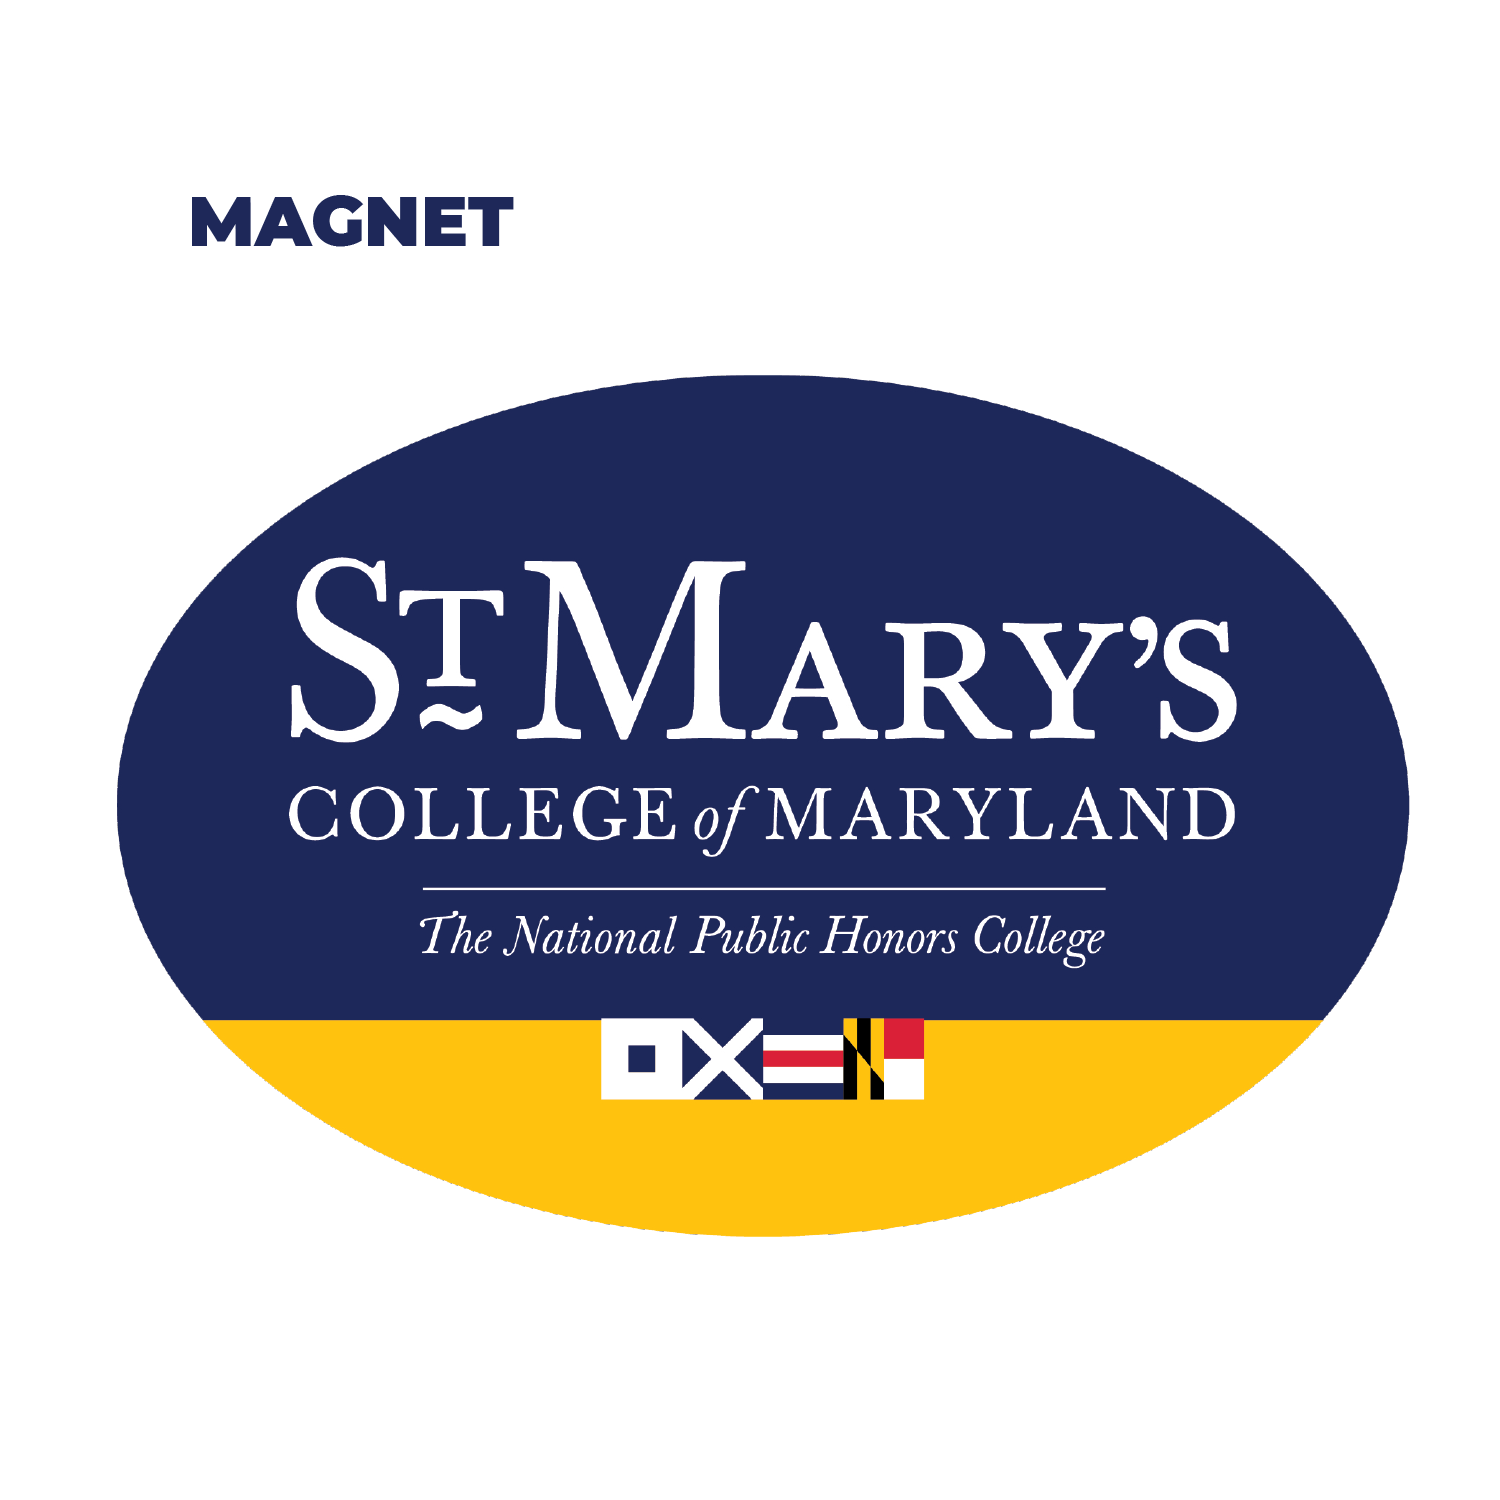 oval shaped navy and gold magnet that says "St. Mary's College of Maryland - The National Public Honors College